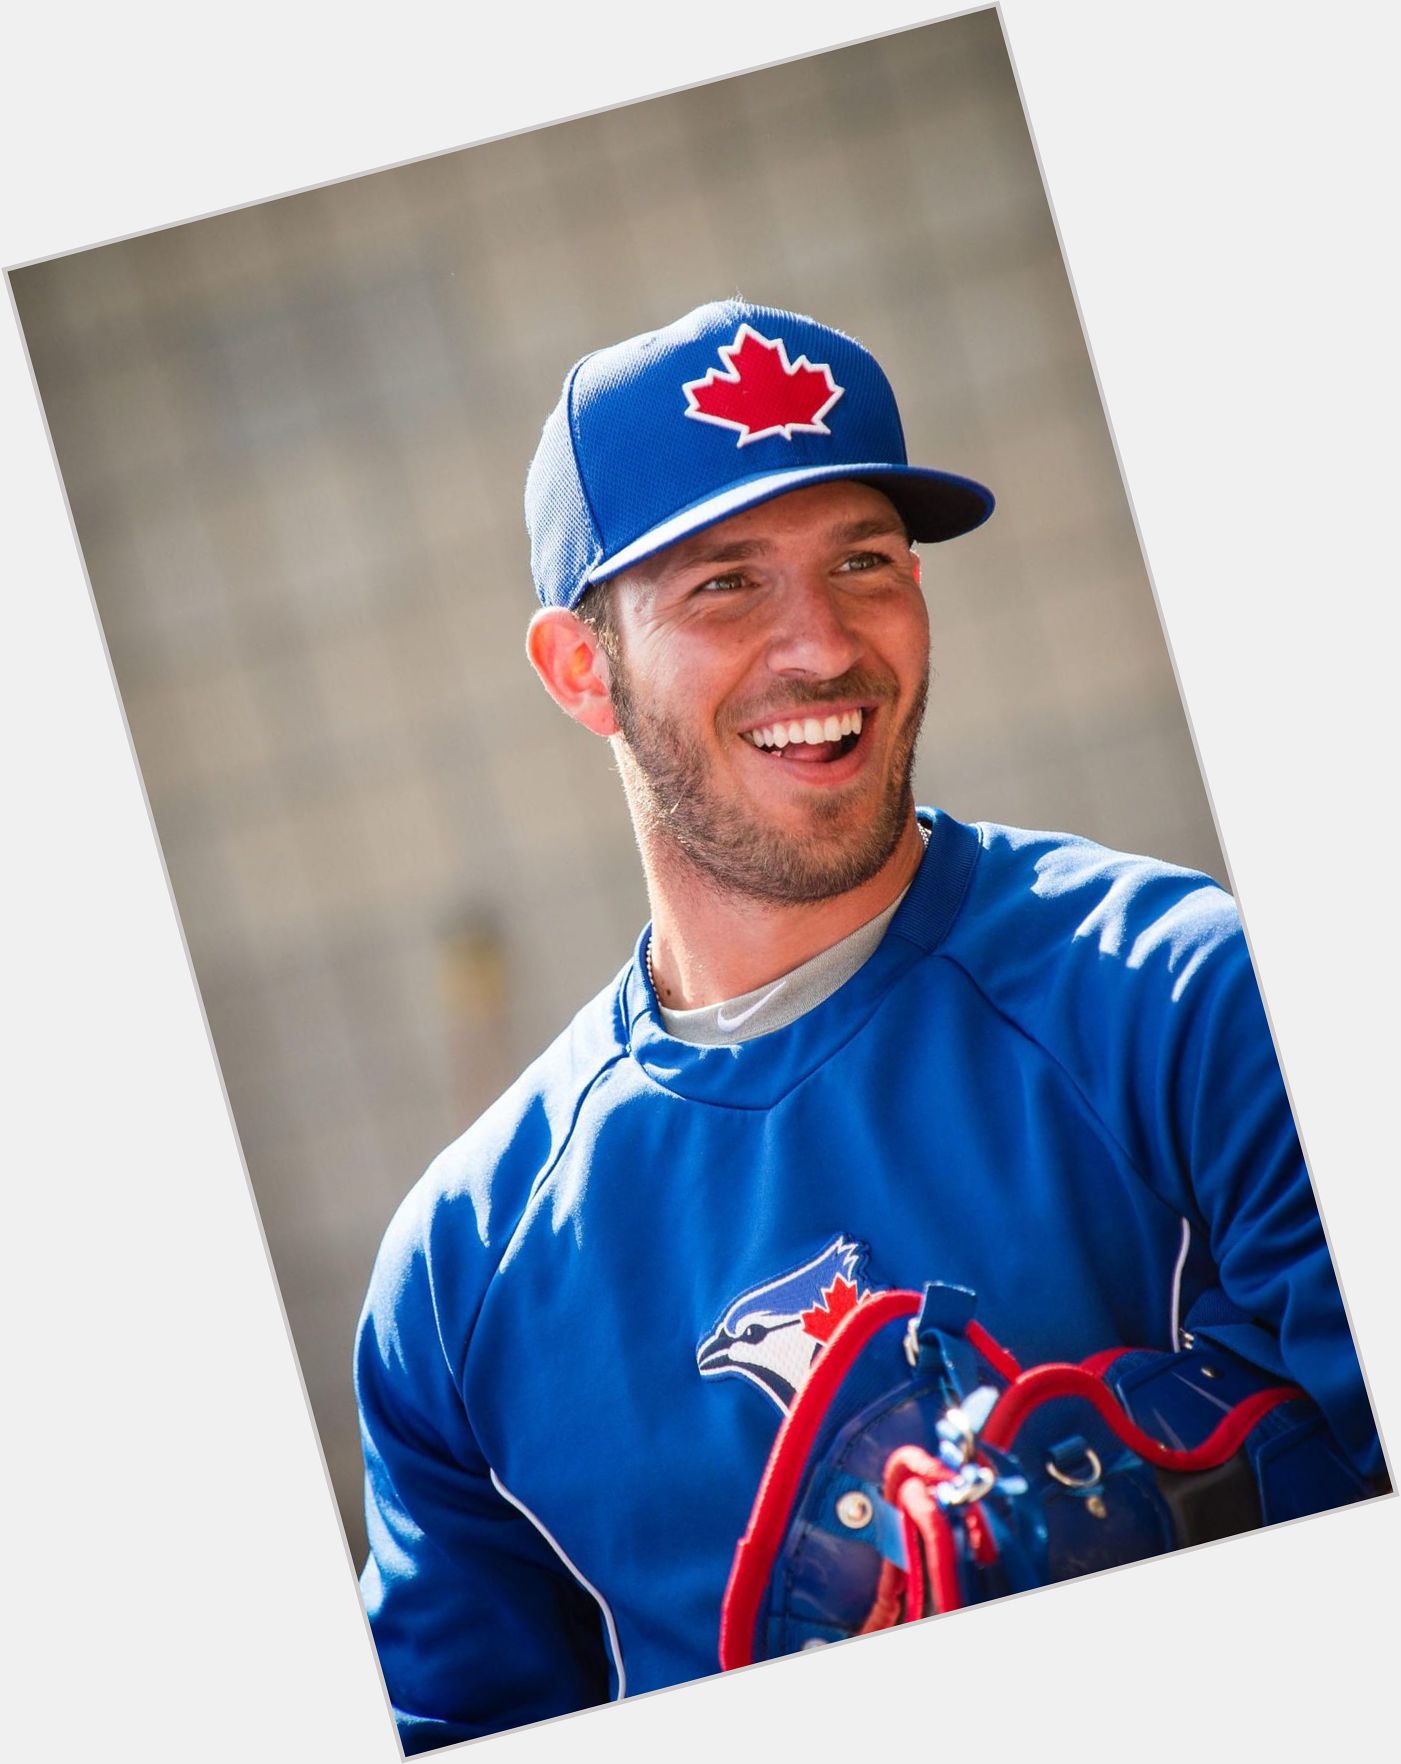 J P Arencibia dating 2